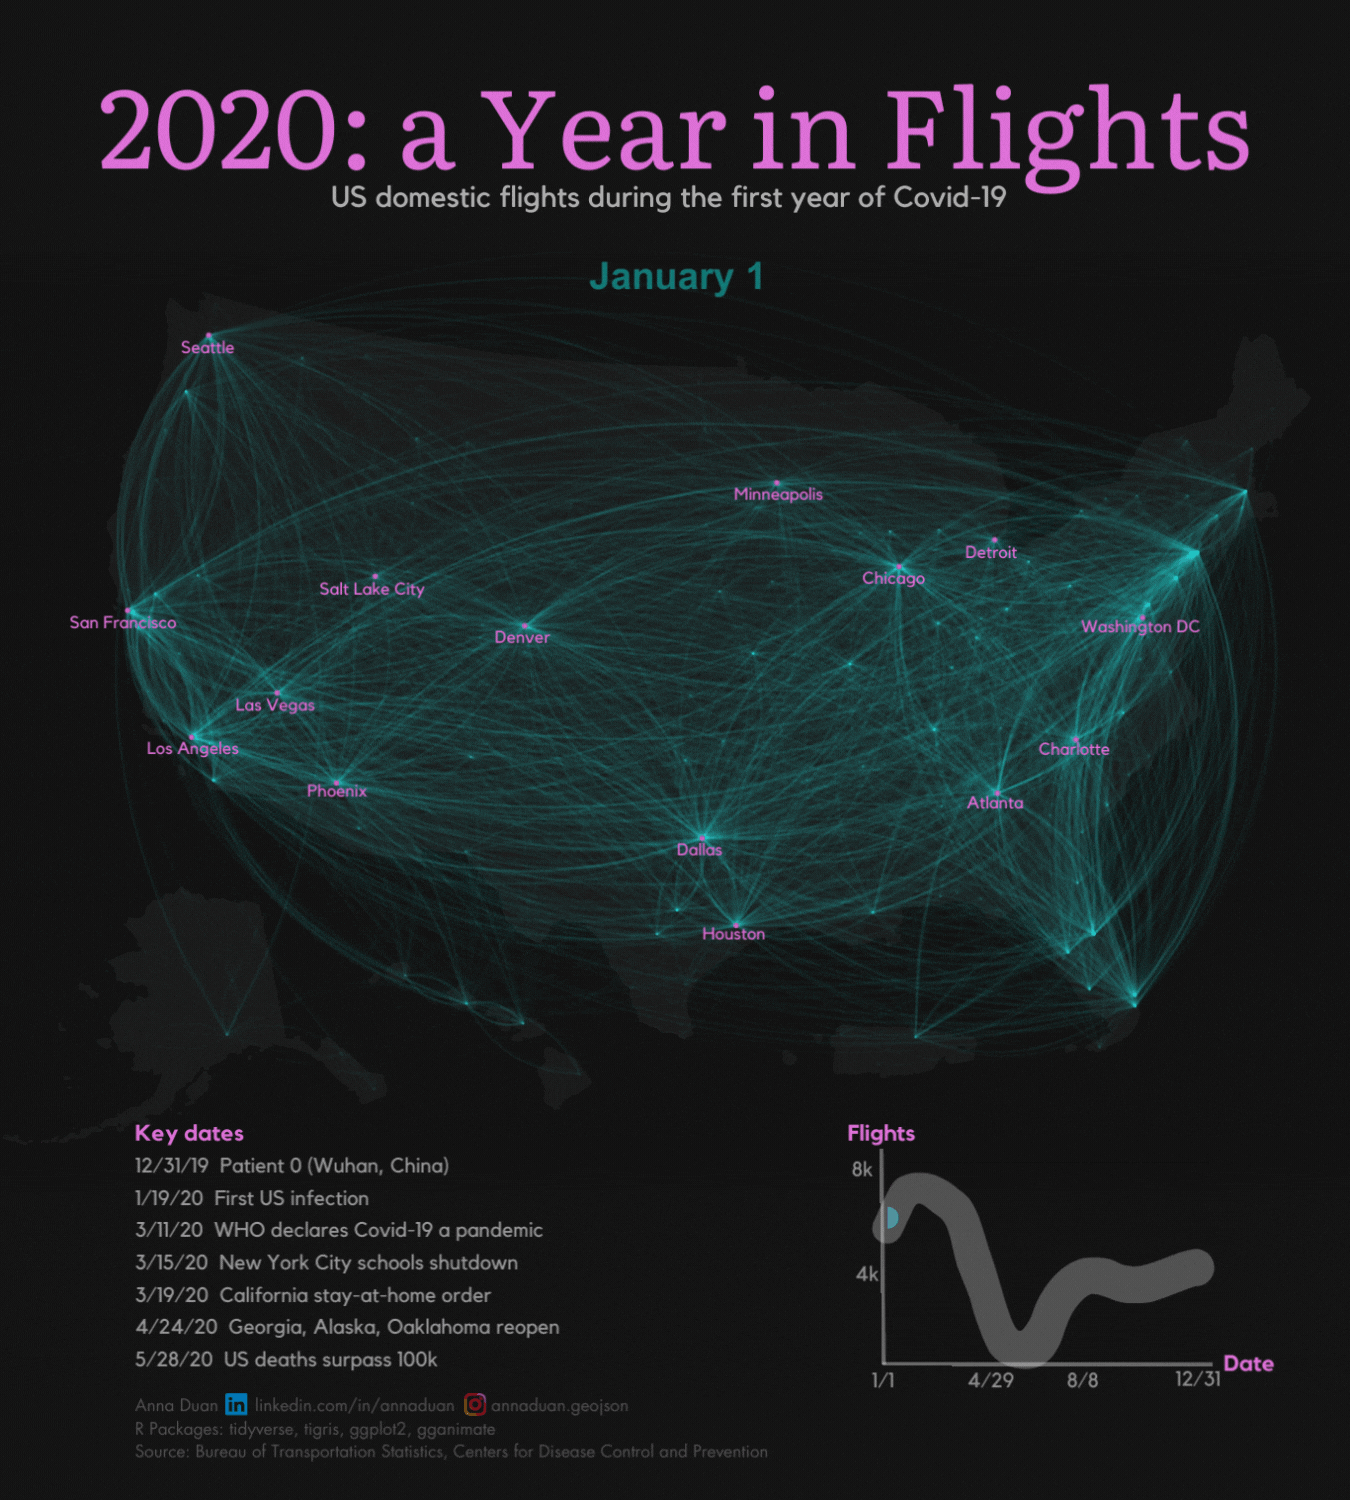 Thumbnail image of 2020 in Flights by Anna Duan